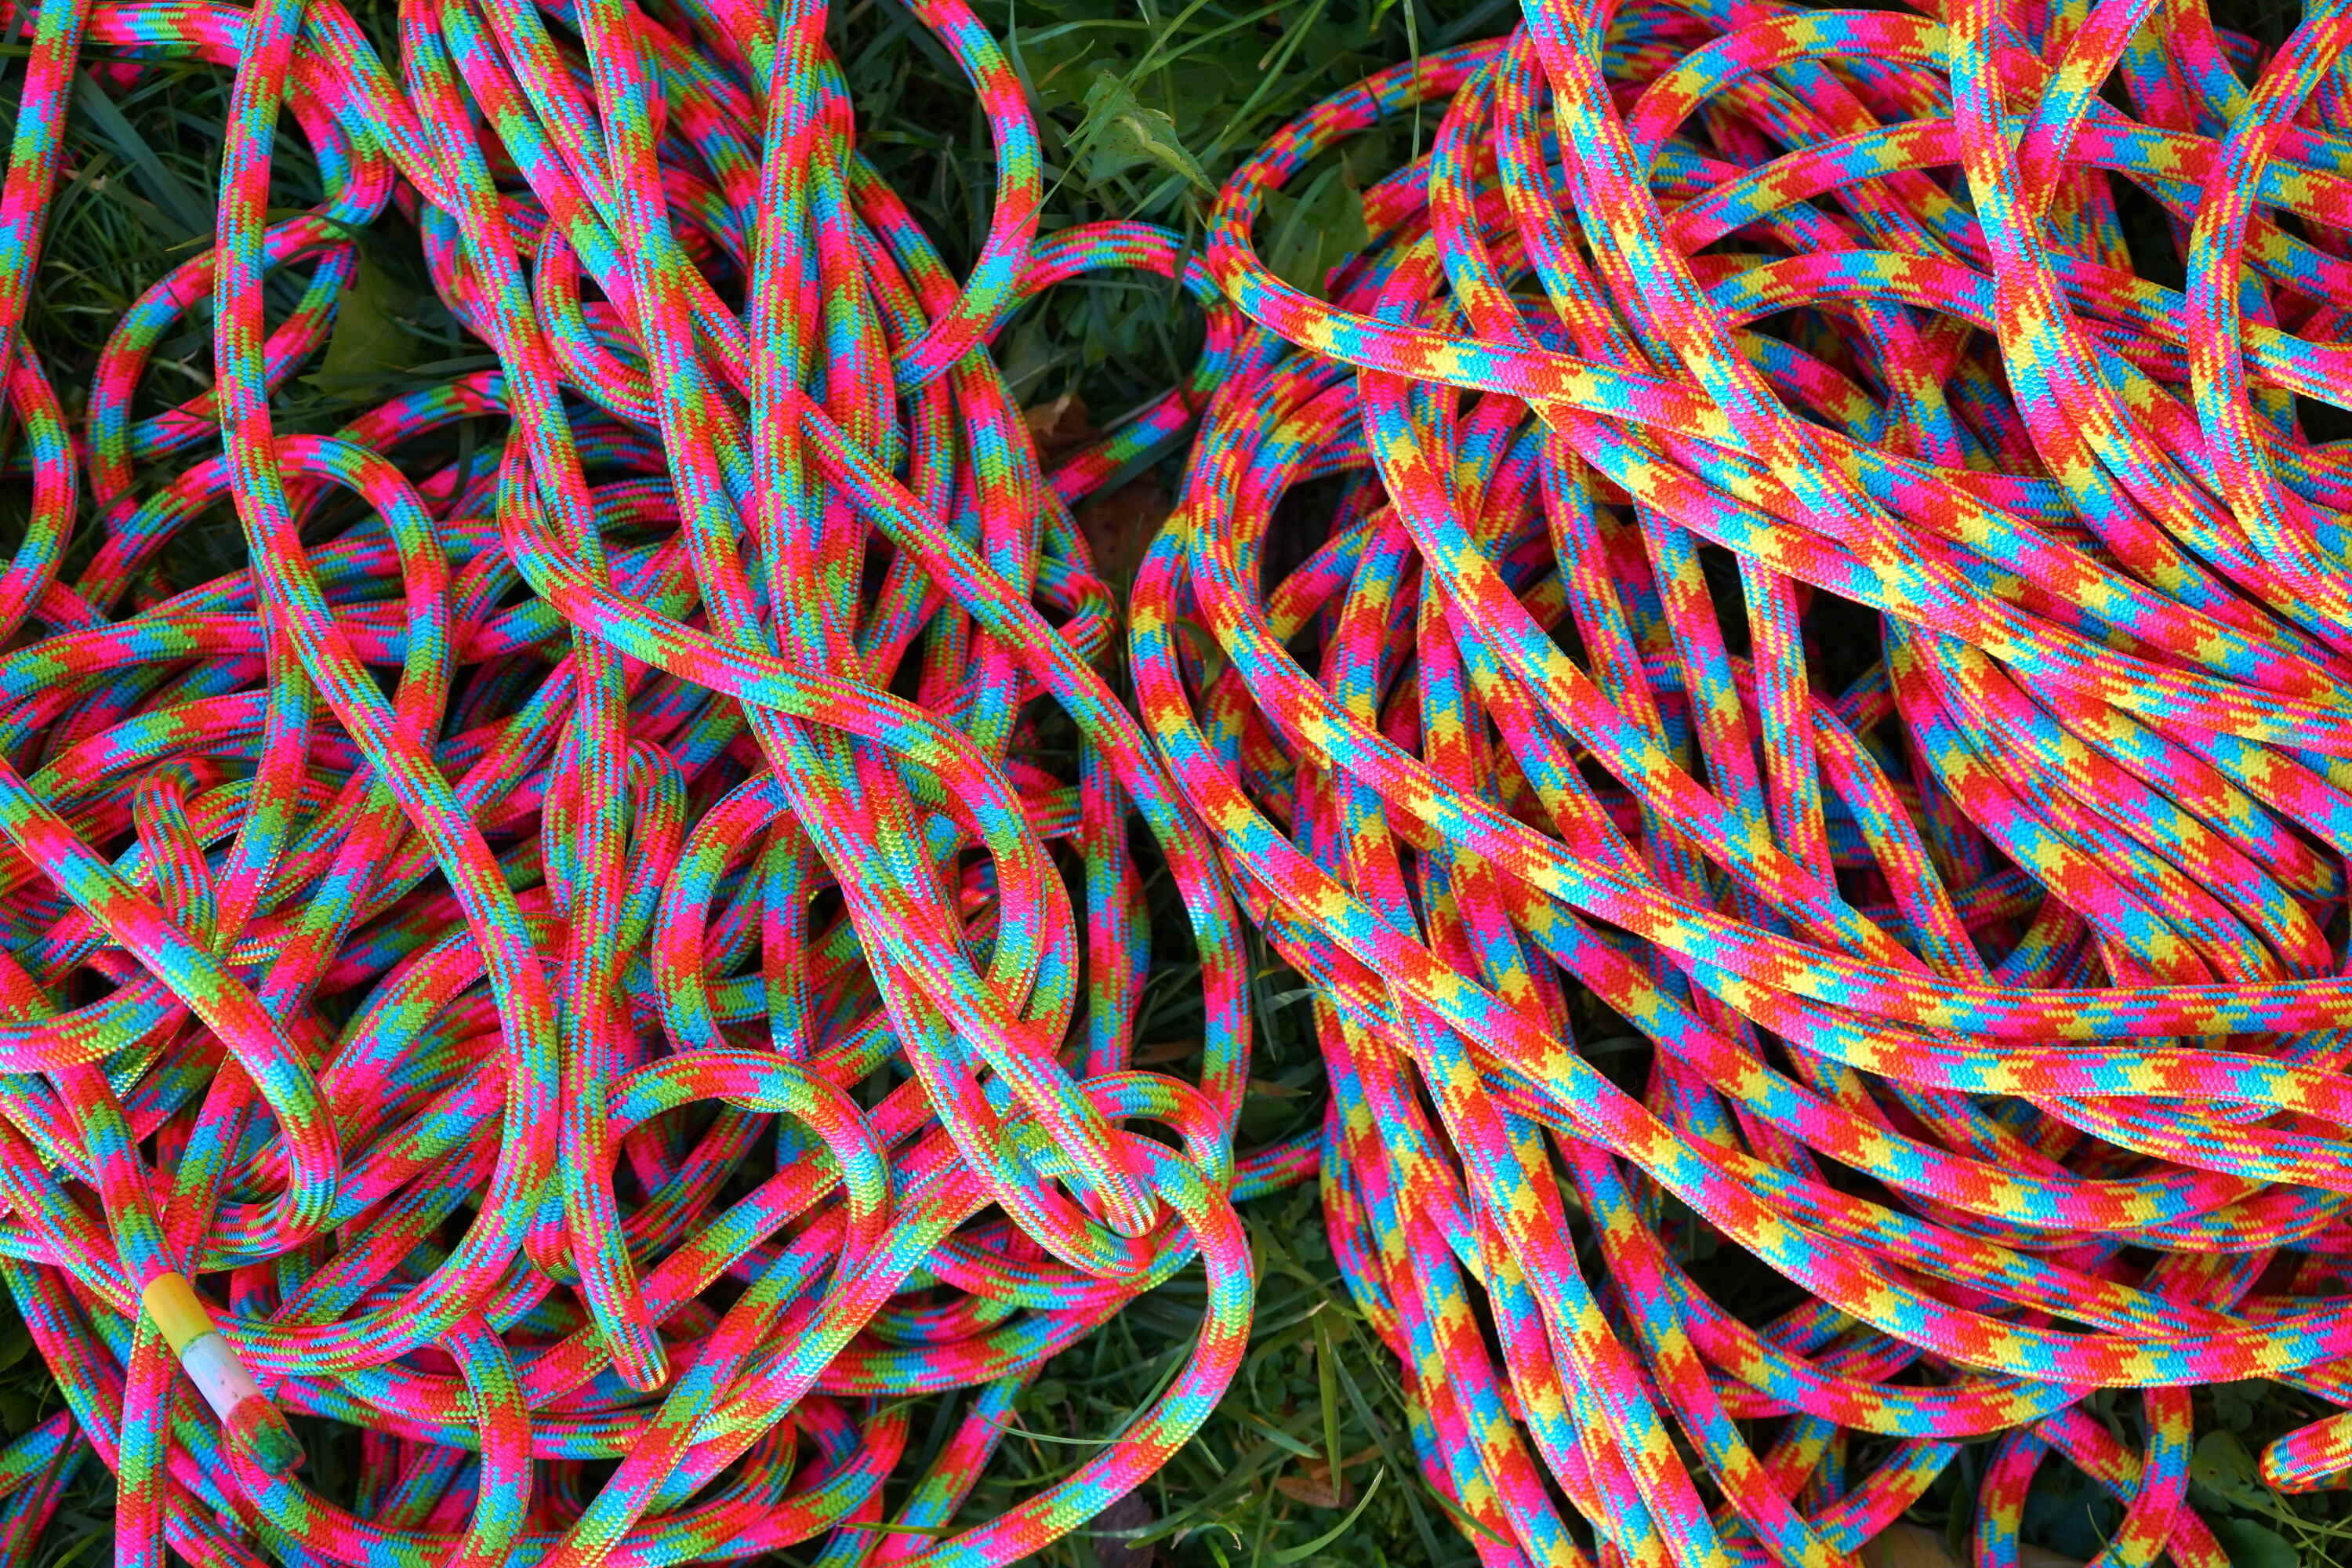 We dressed the ropes in neon colour!